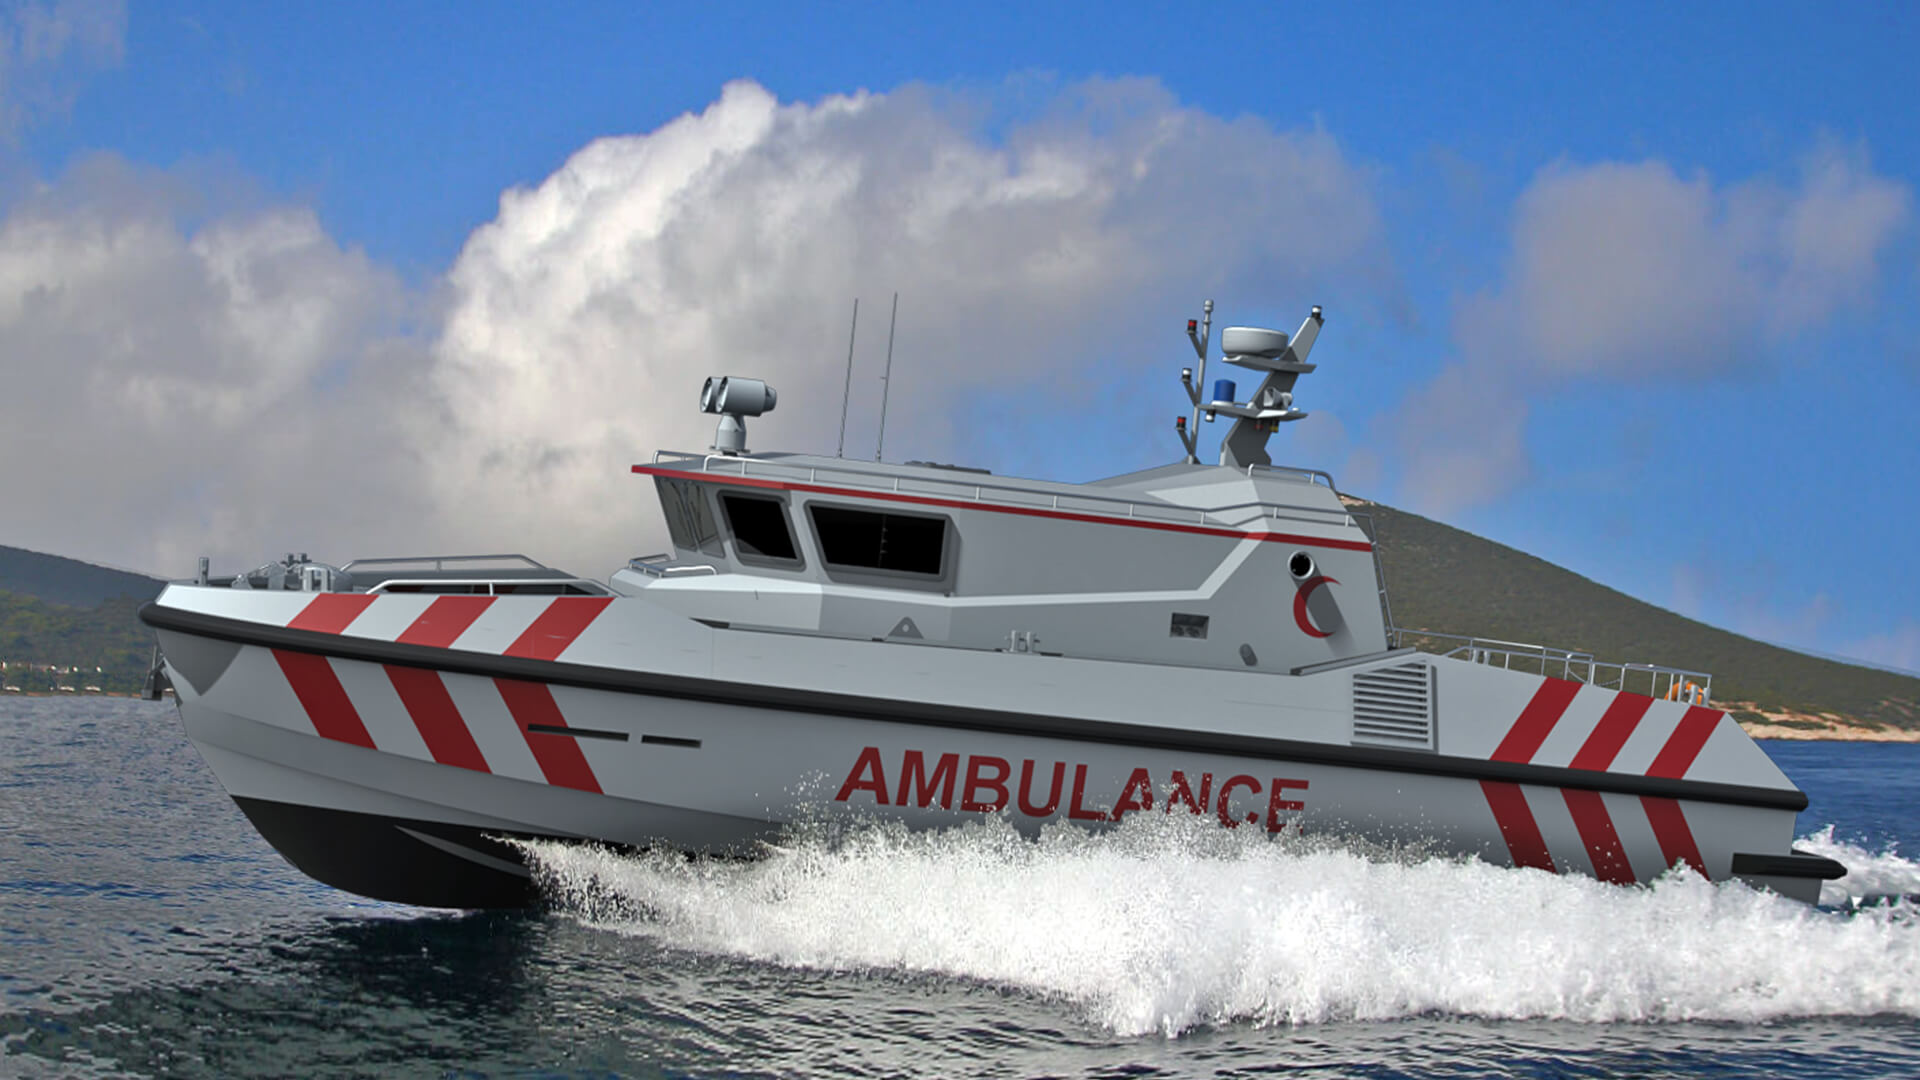 images/vessels/03-utility-support-craft/01-sar-ambulance-boats/05-ares-42-hector-ambulance/01.jpg